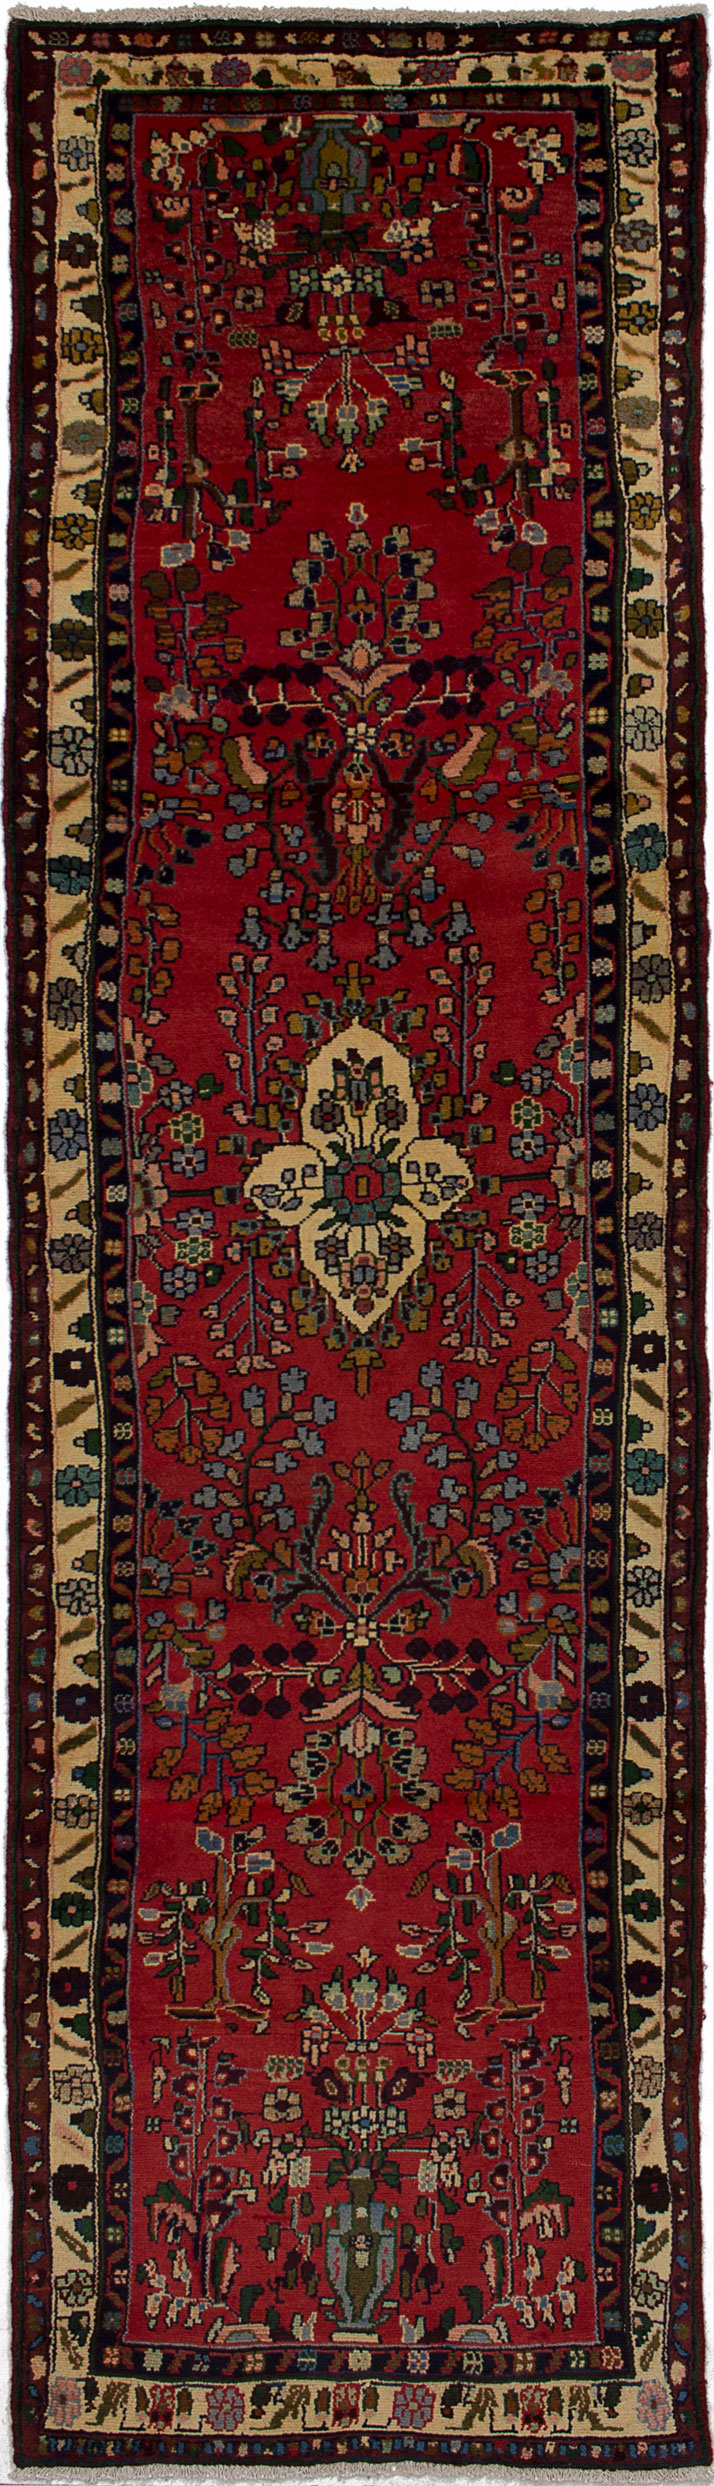 Hand-knotted Hamadan Red Wool Rug 2'8" x 9'8"  Size: 2'8" x 9'8"  